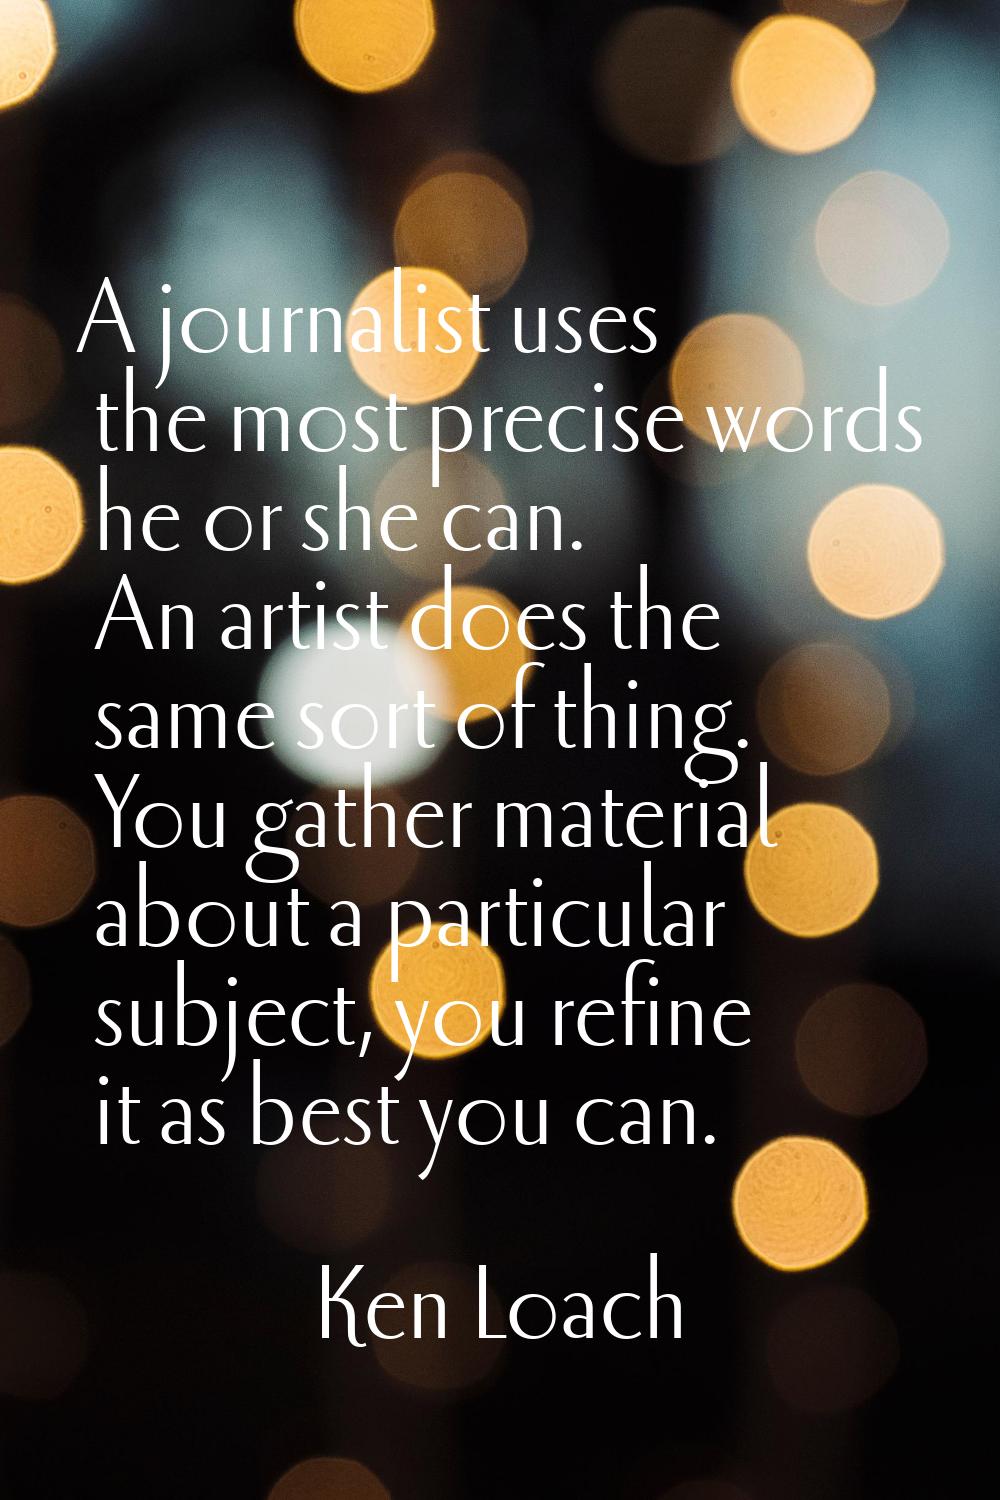 A journalist uses the most precise words he or she can. An artist does the same sort of thing. You 